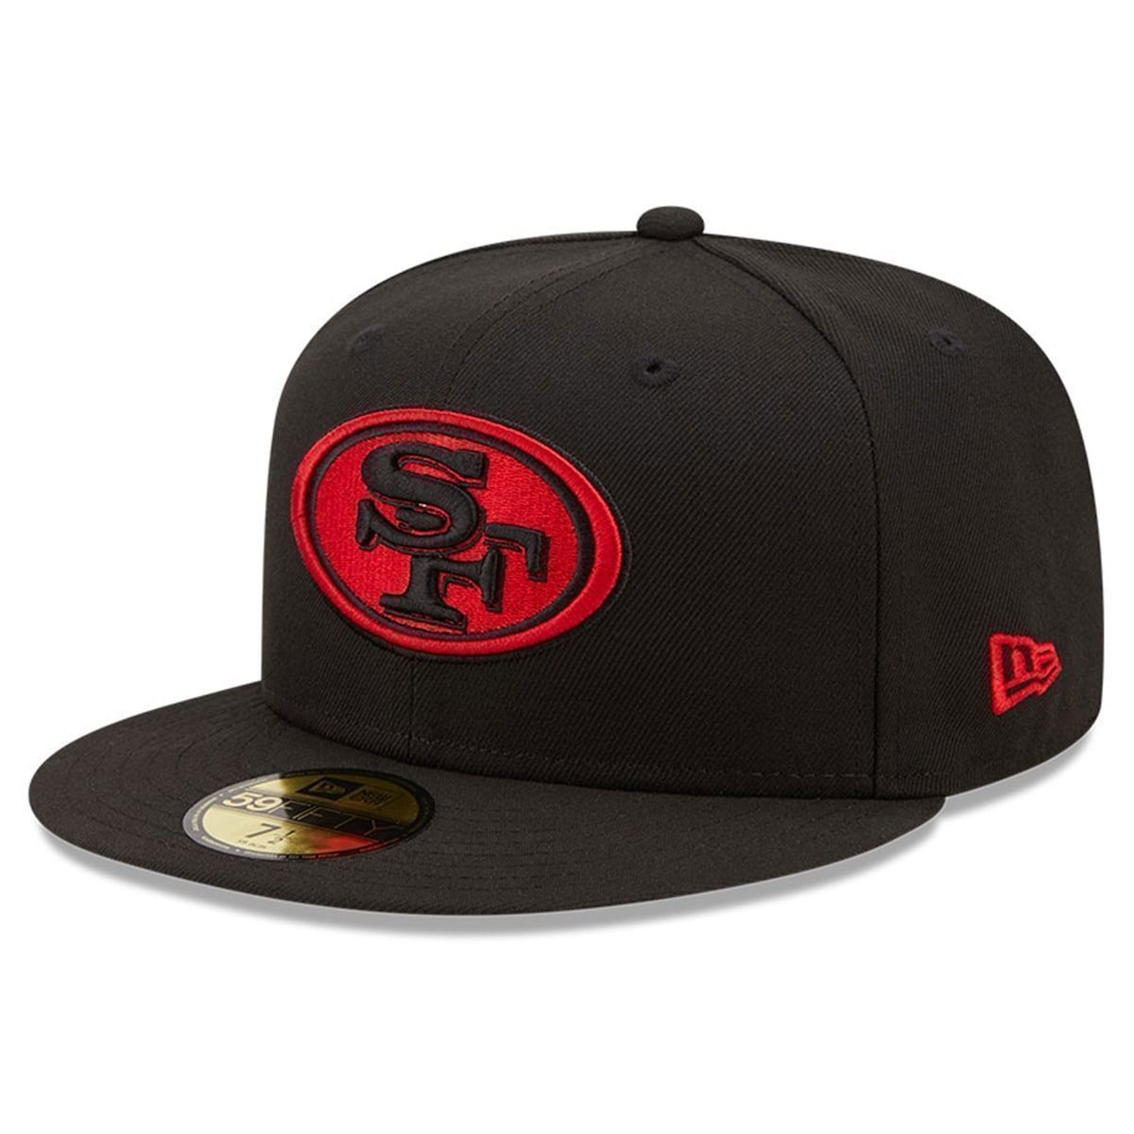 New Era Men's Black San Francisco 49ers Team 59FIFTY Fitted Hat - Image 2 of 4